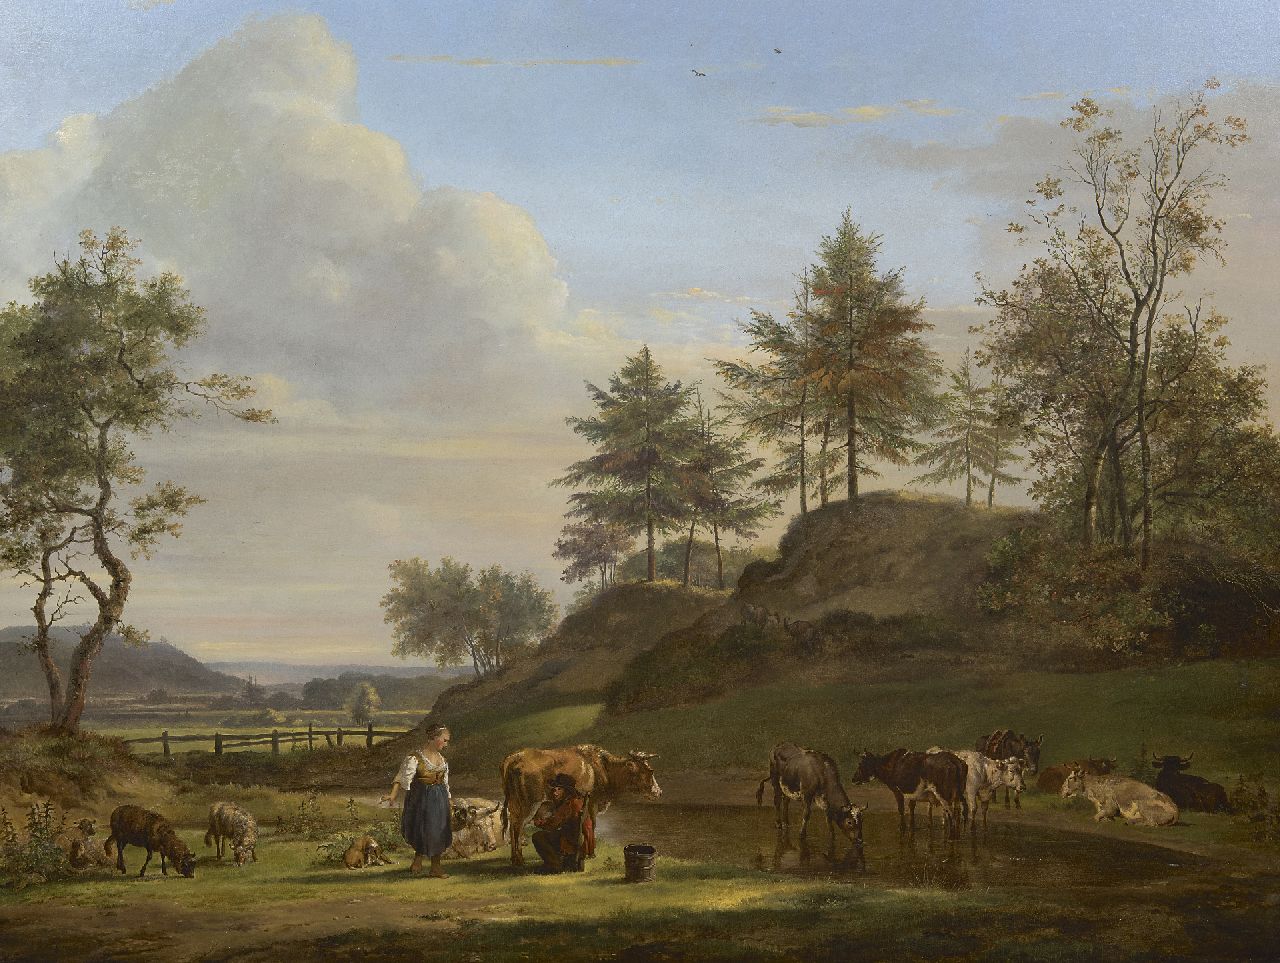 Os P.G. van | Pieter Gerardus van Os, A Dutch Arcadian landscape with shepherds and cattle, oil on panel 63.1 x 83.2 cm, signed l.l. and dated 1815